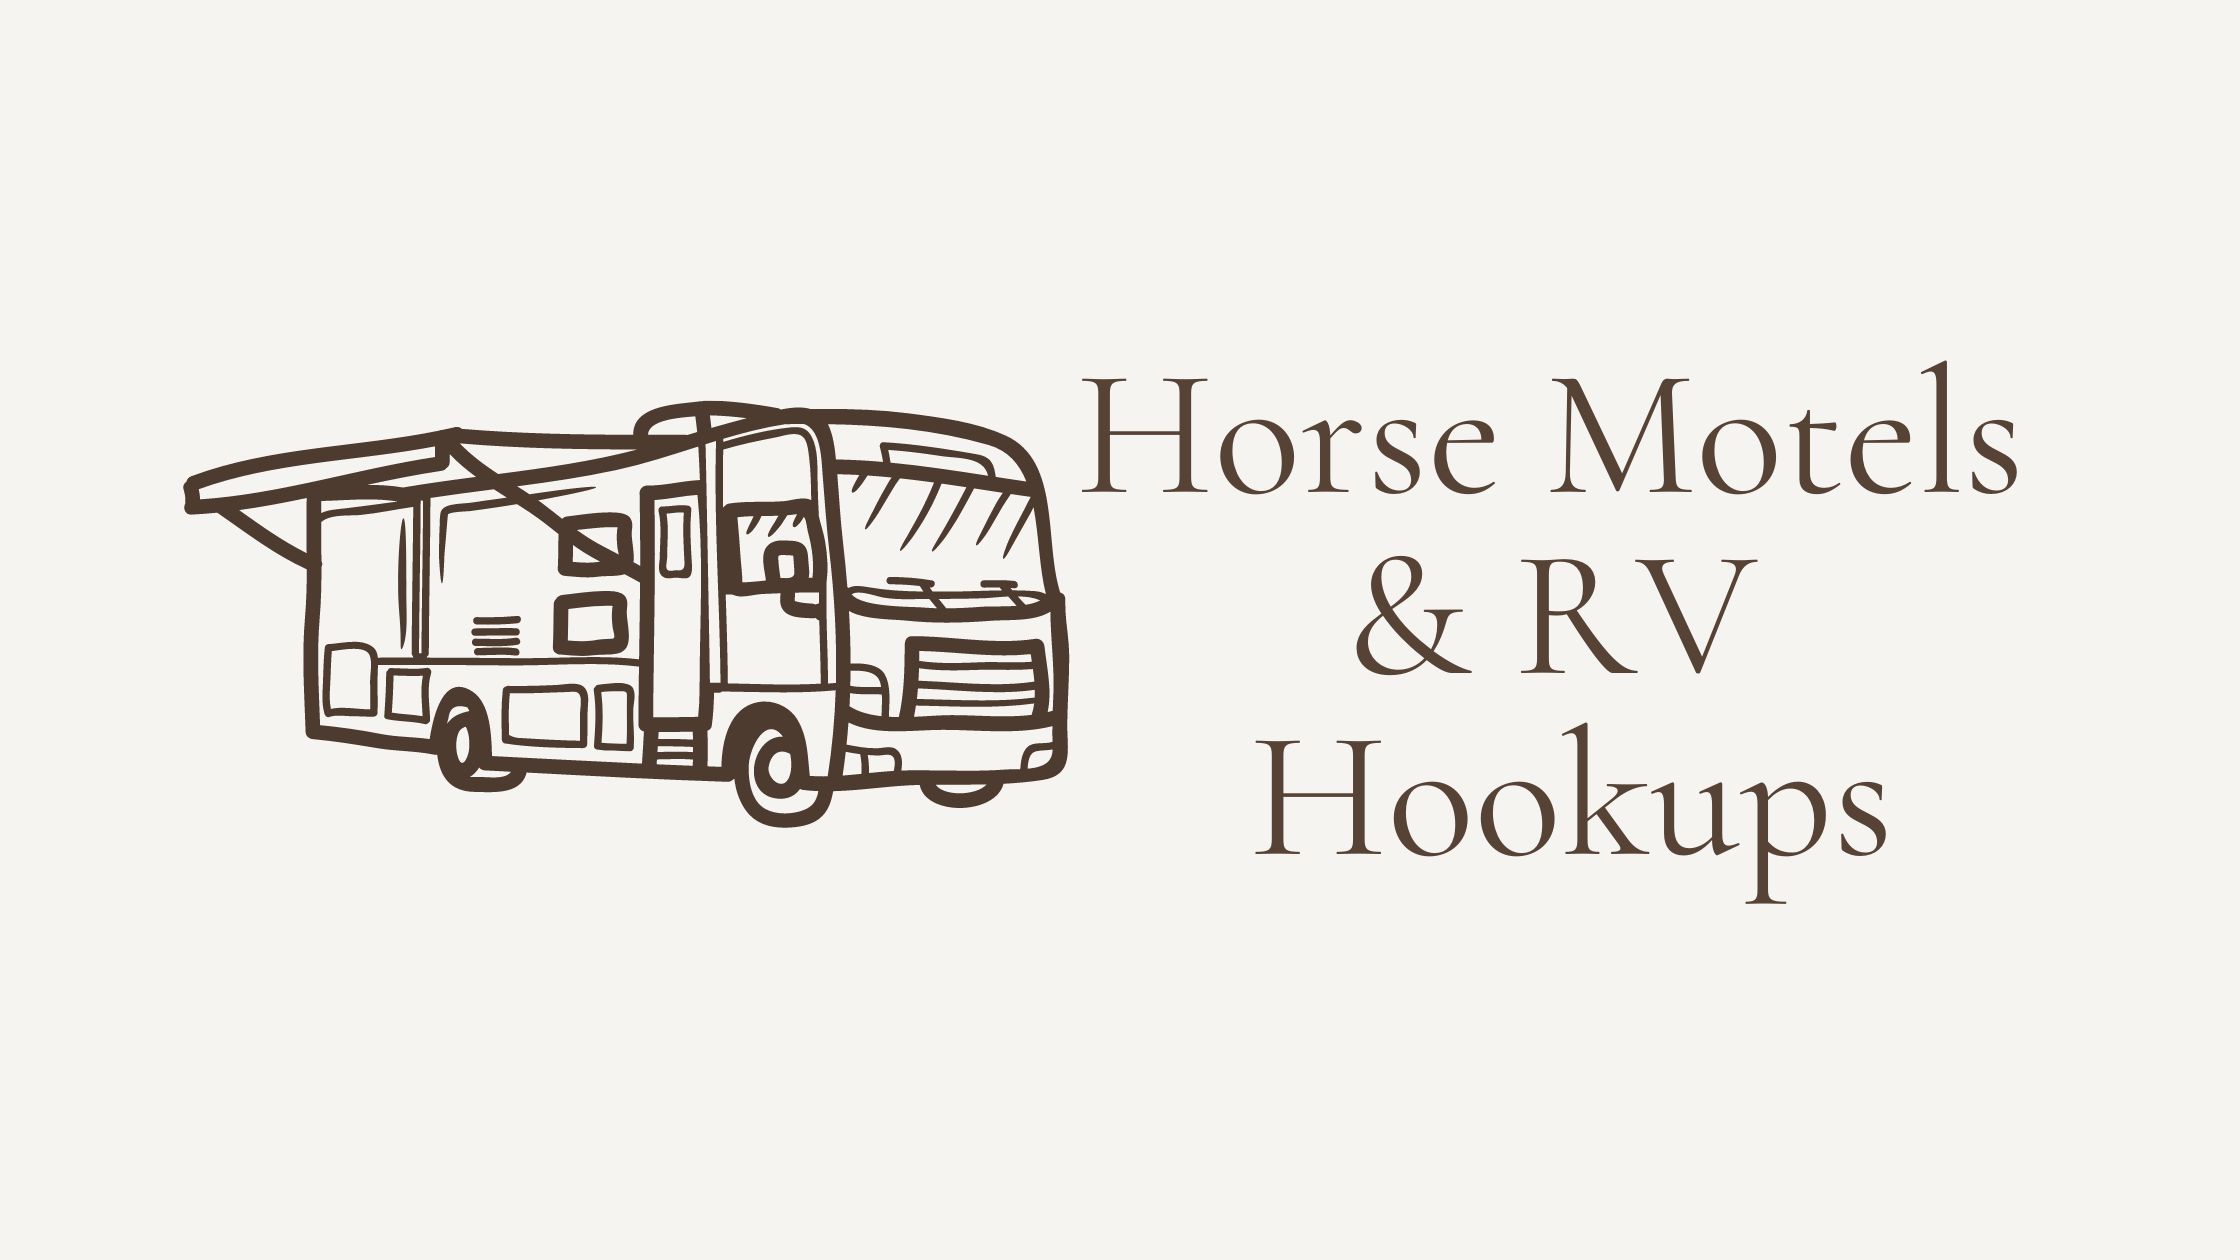 Horse Motels & RV Hookups in Chattanooga